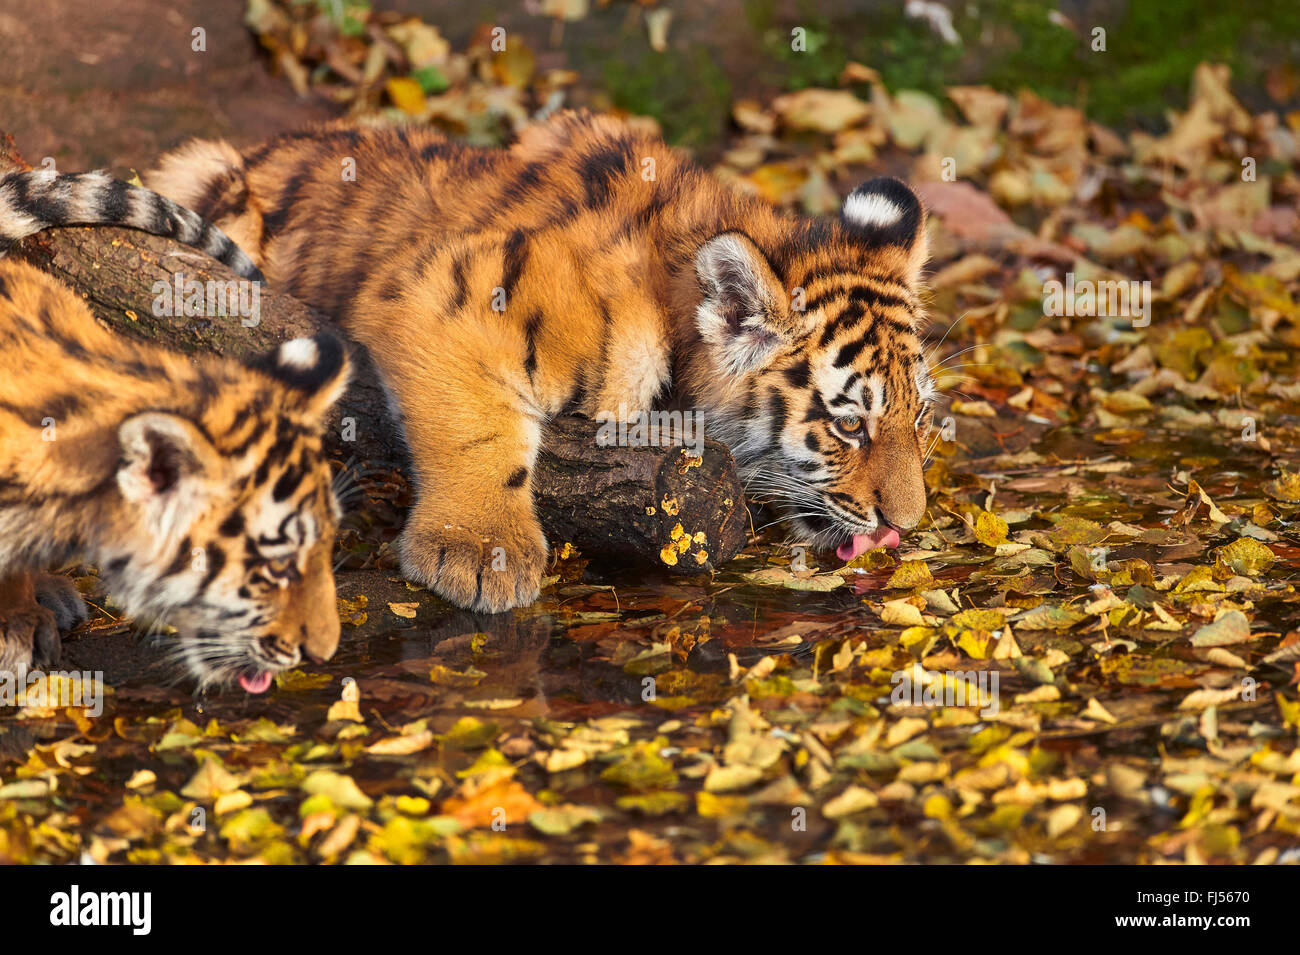 Siberian tiger, Amurian tiger (Panthera tigris altaica), two tiger cubs drinking on the waterfront Stock Photo